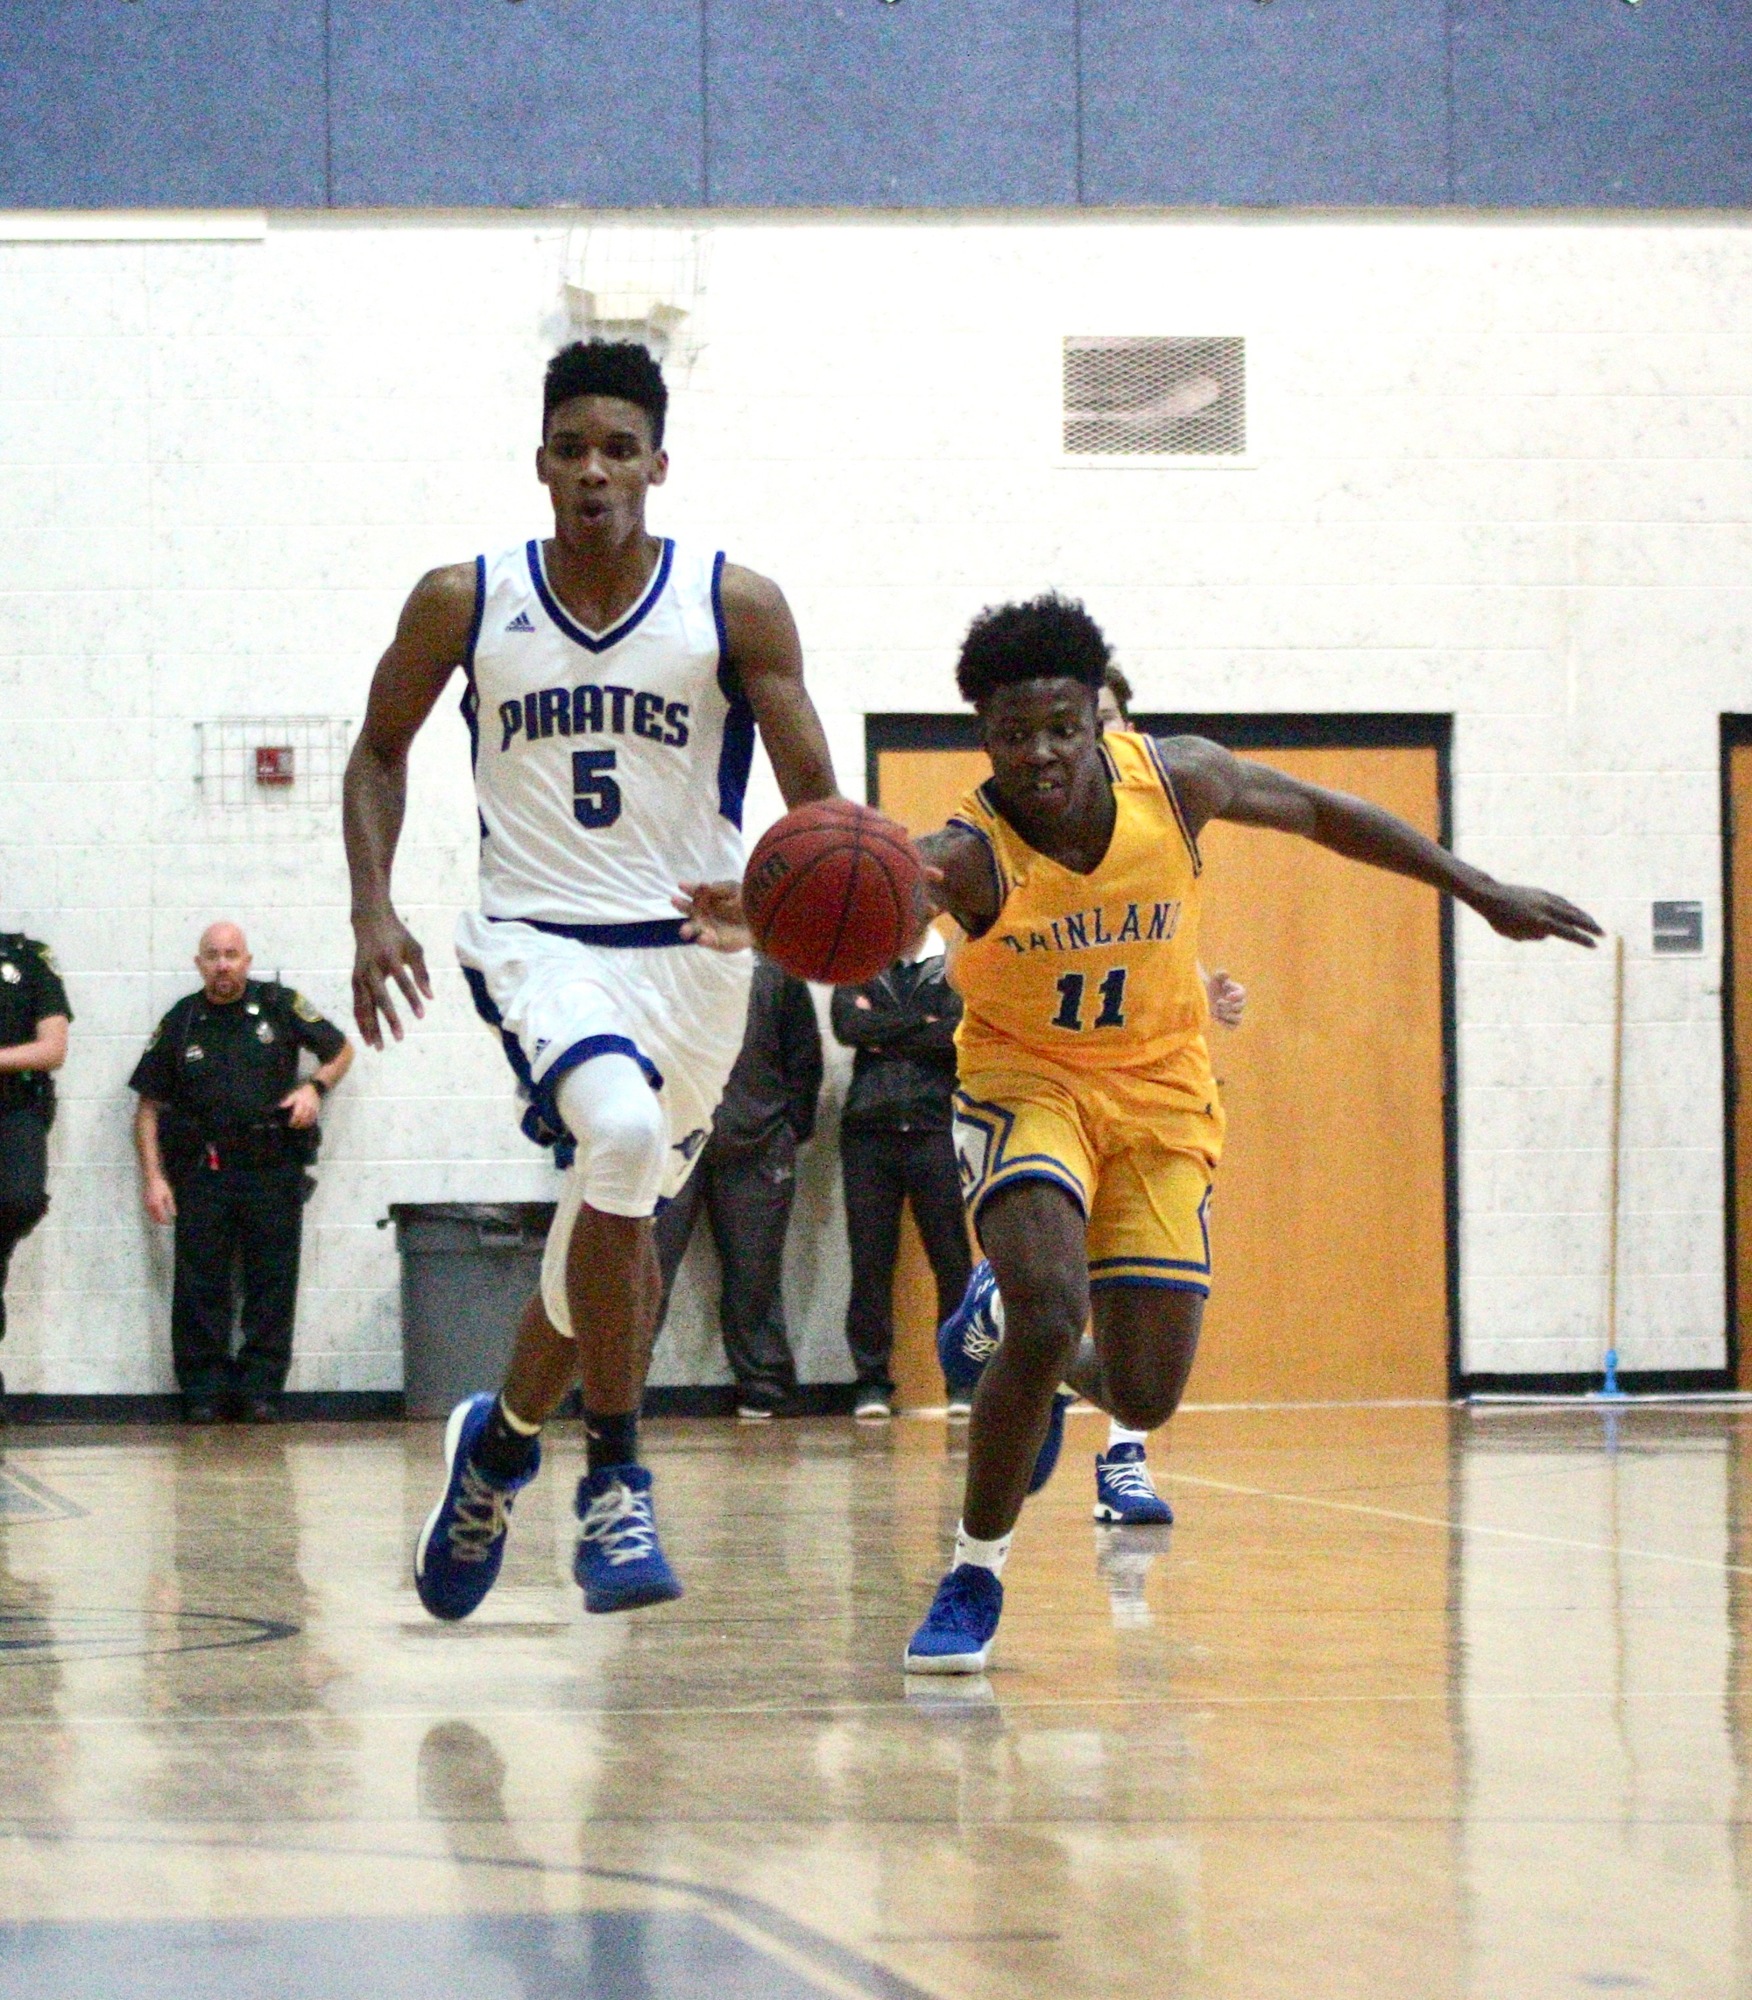 Mainland guard Taron Keith strips the ball from a Matanzas guard. Photo by Ray Boone